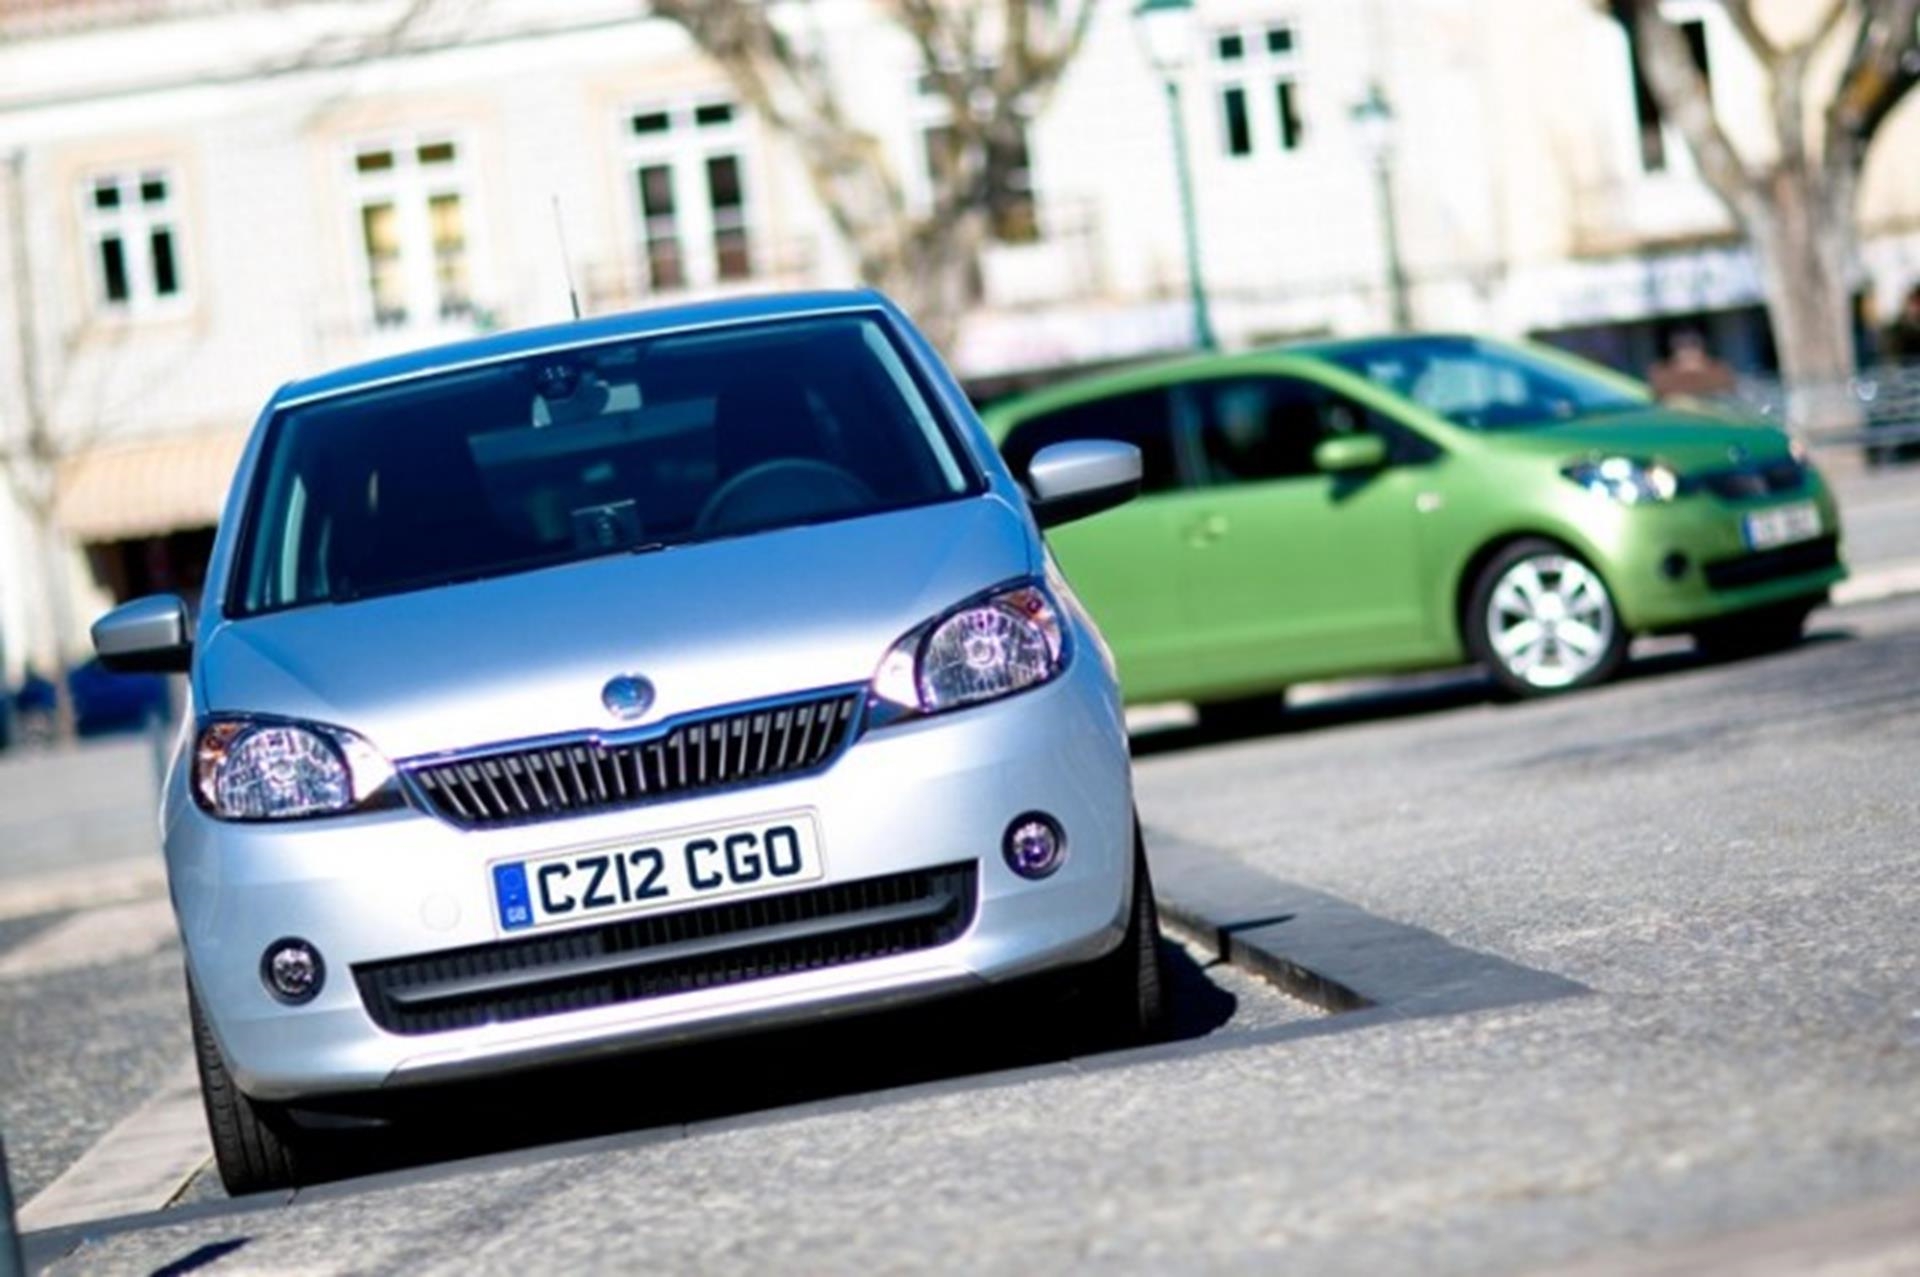 NEW SKODA COMPACT HATCH TO BE CALLED RAPID